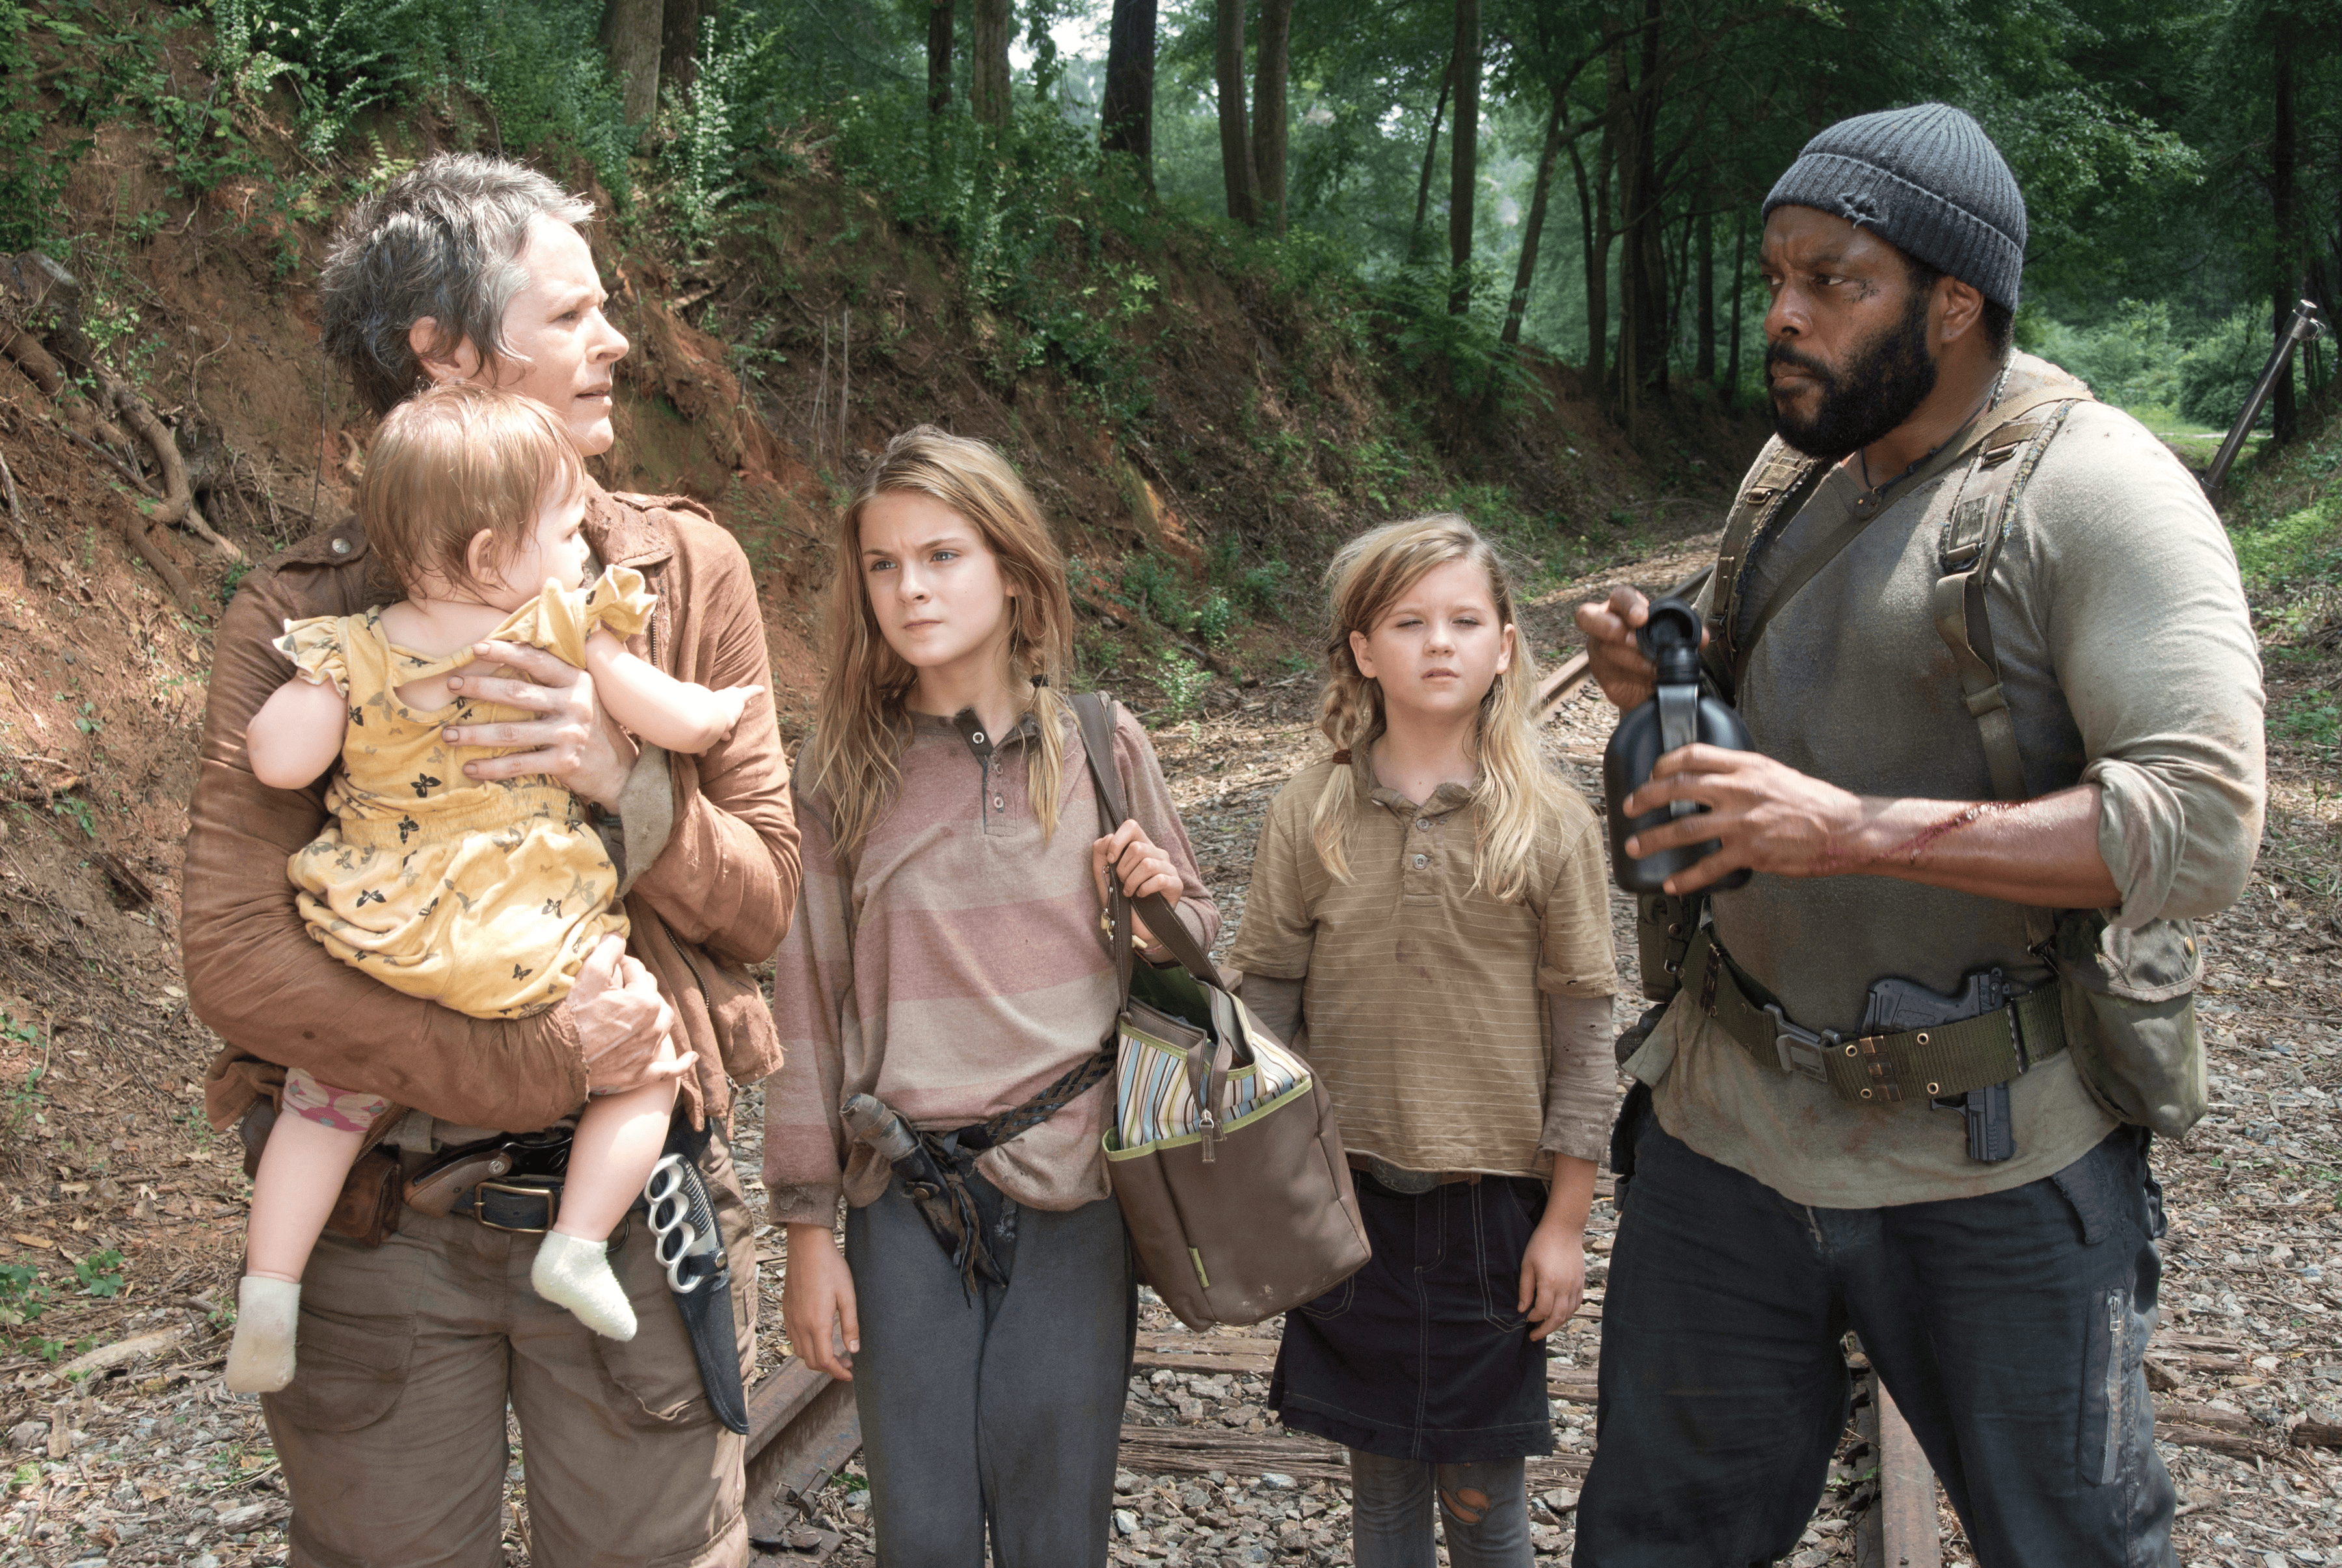 http://img3.wikia.nocookie.net/__cb20140217202534/walkingdead/images/b/b5/Inmates_Ty_Carol_and_Kids.png